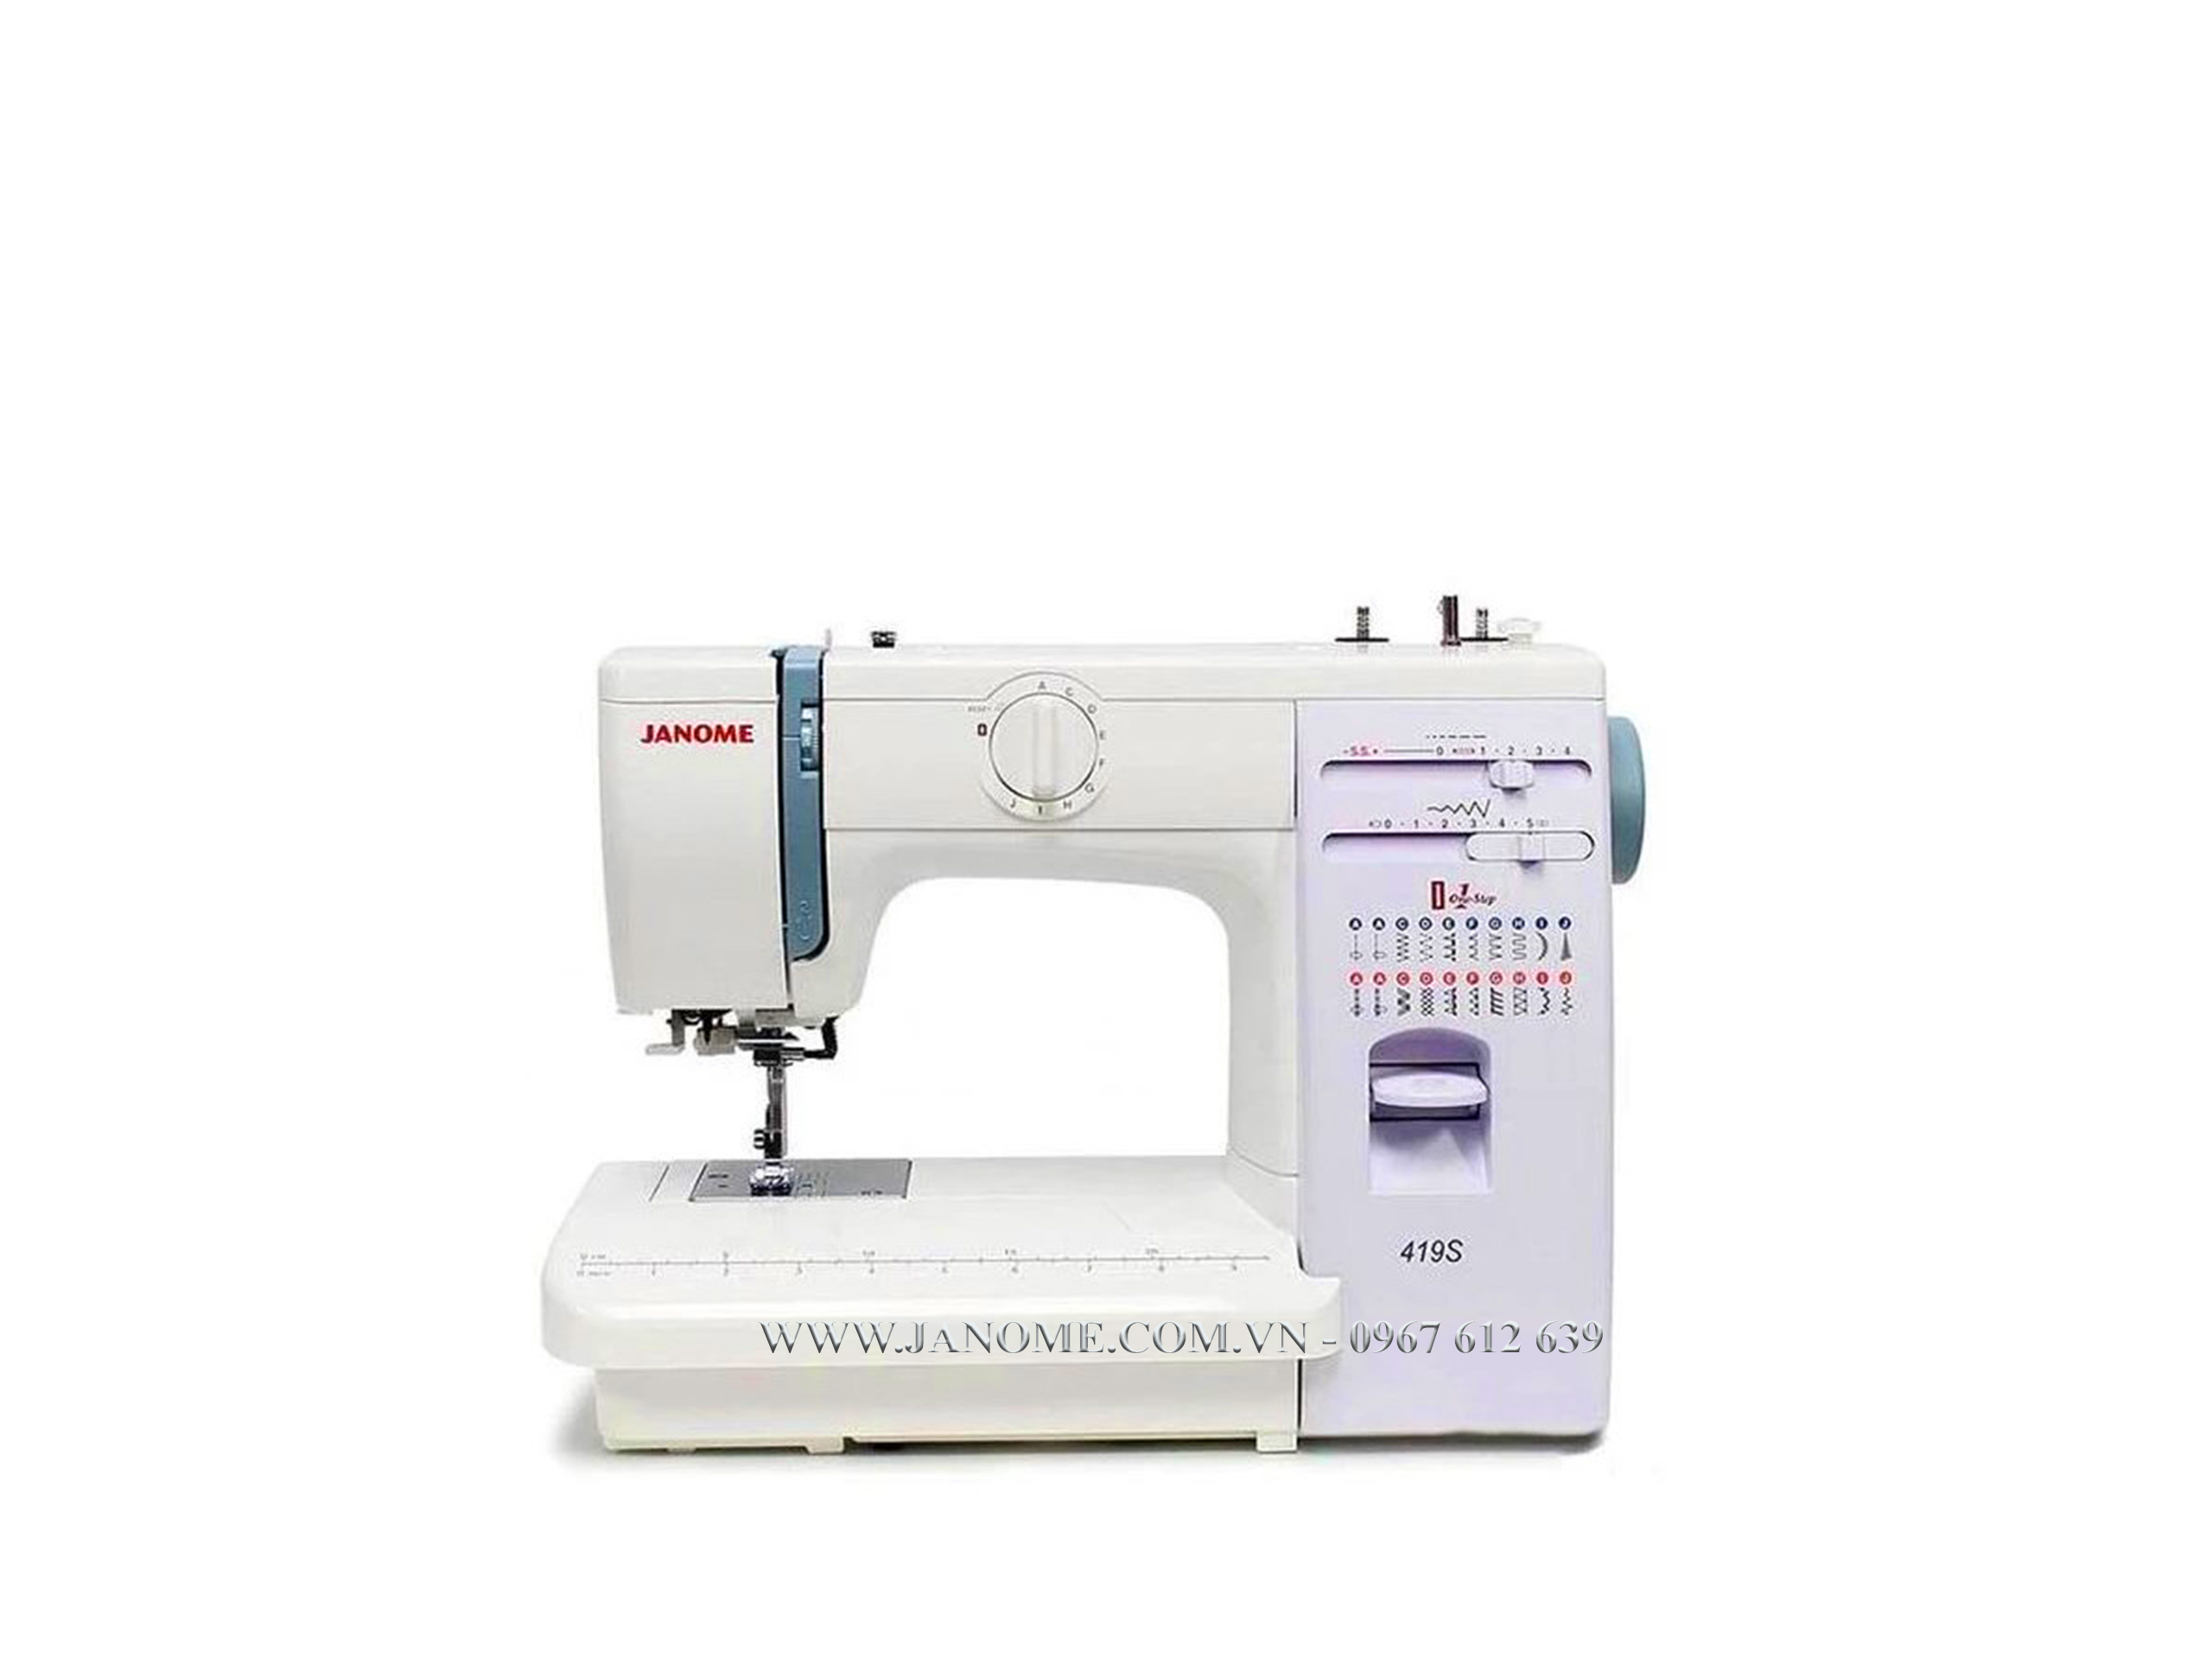 janome419s